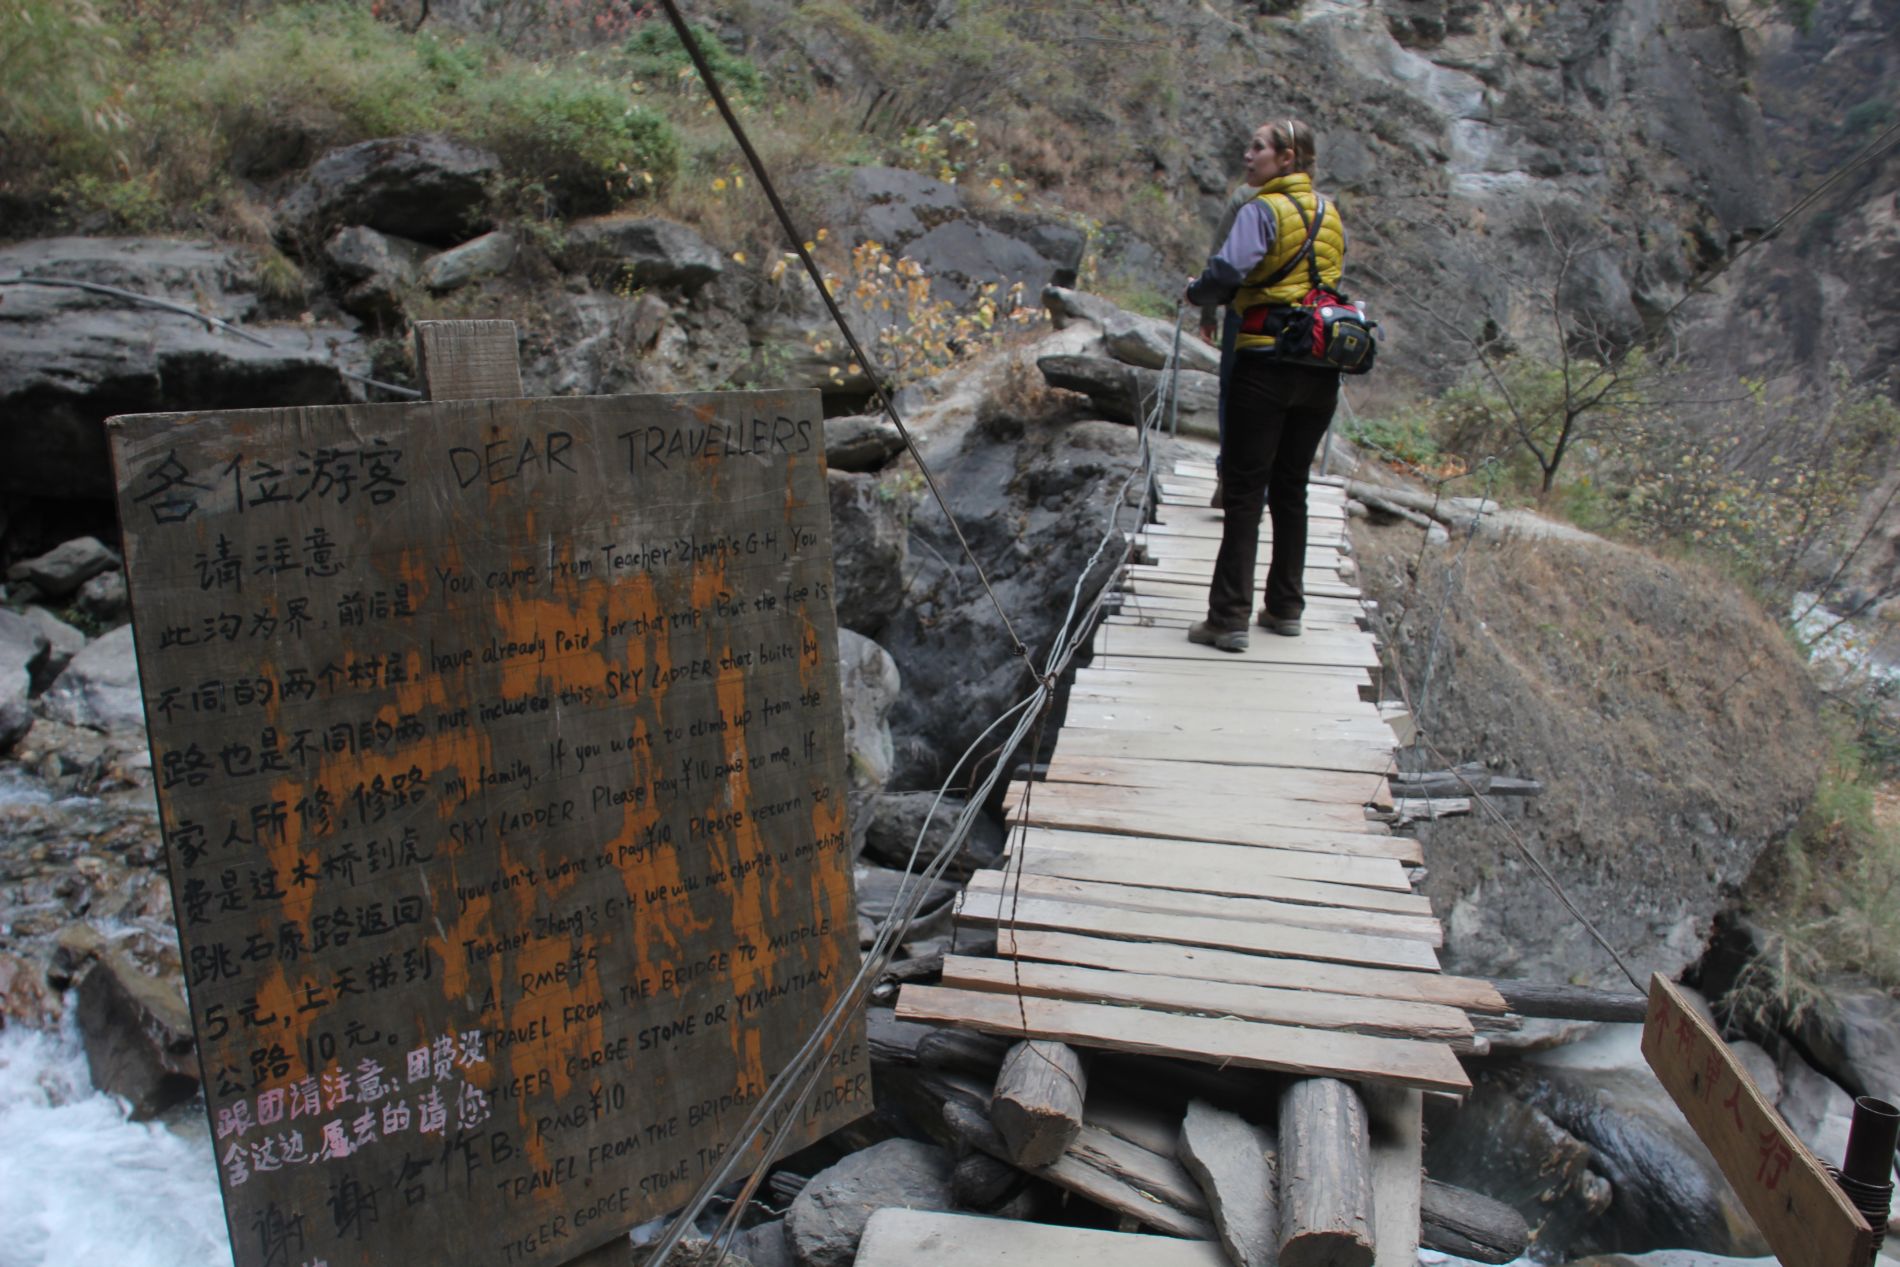 Illegal signs used to extort money from tourists dot the trail in China's Tiger Leaping Gorge.